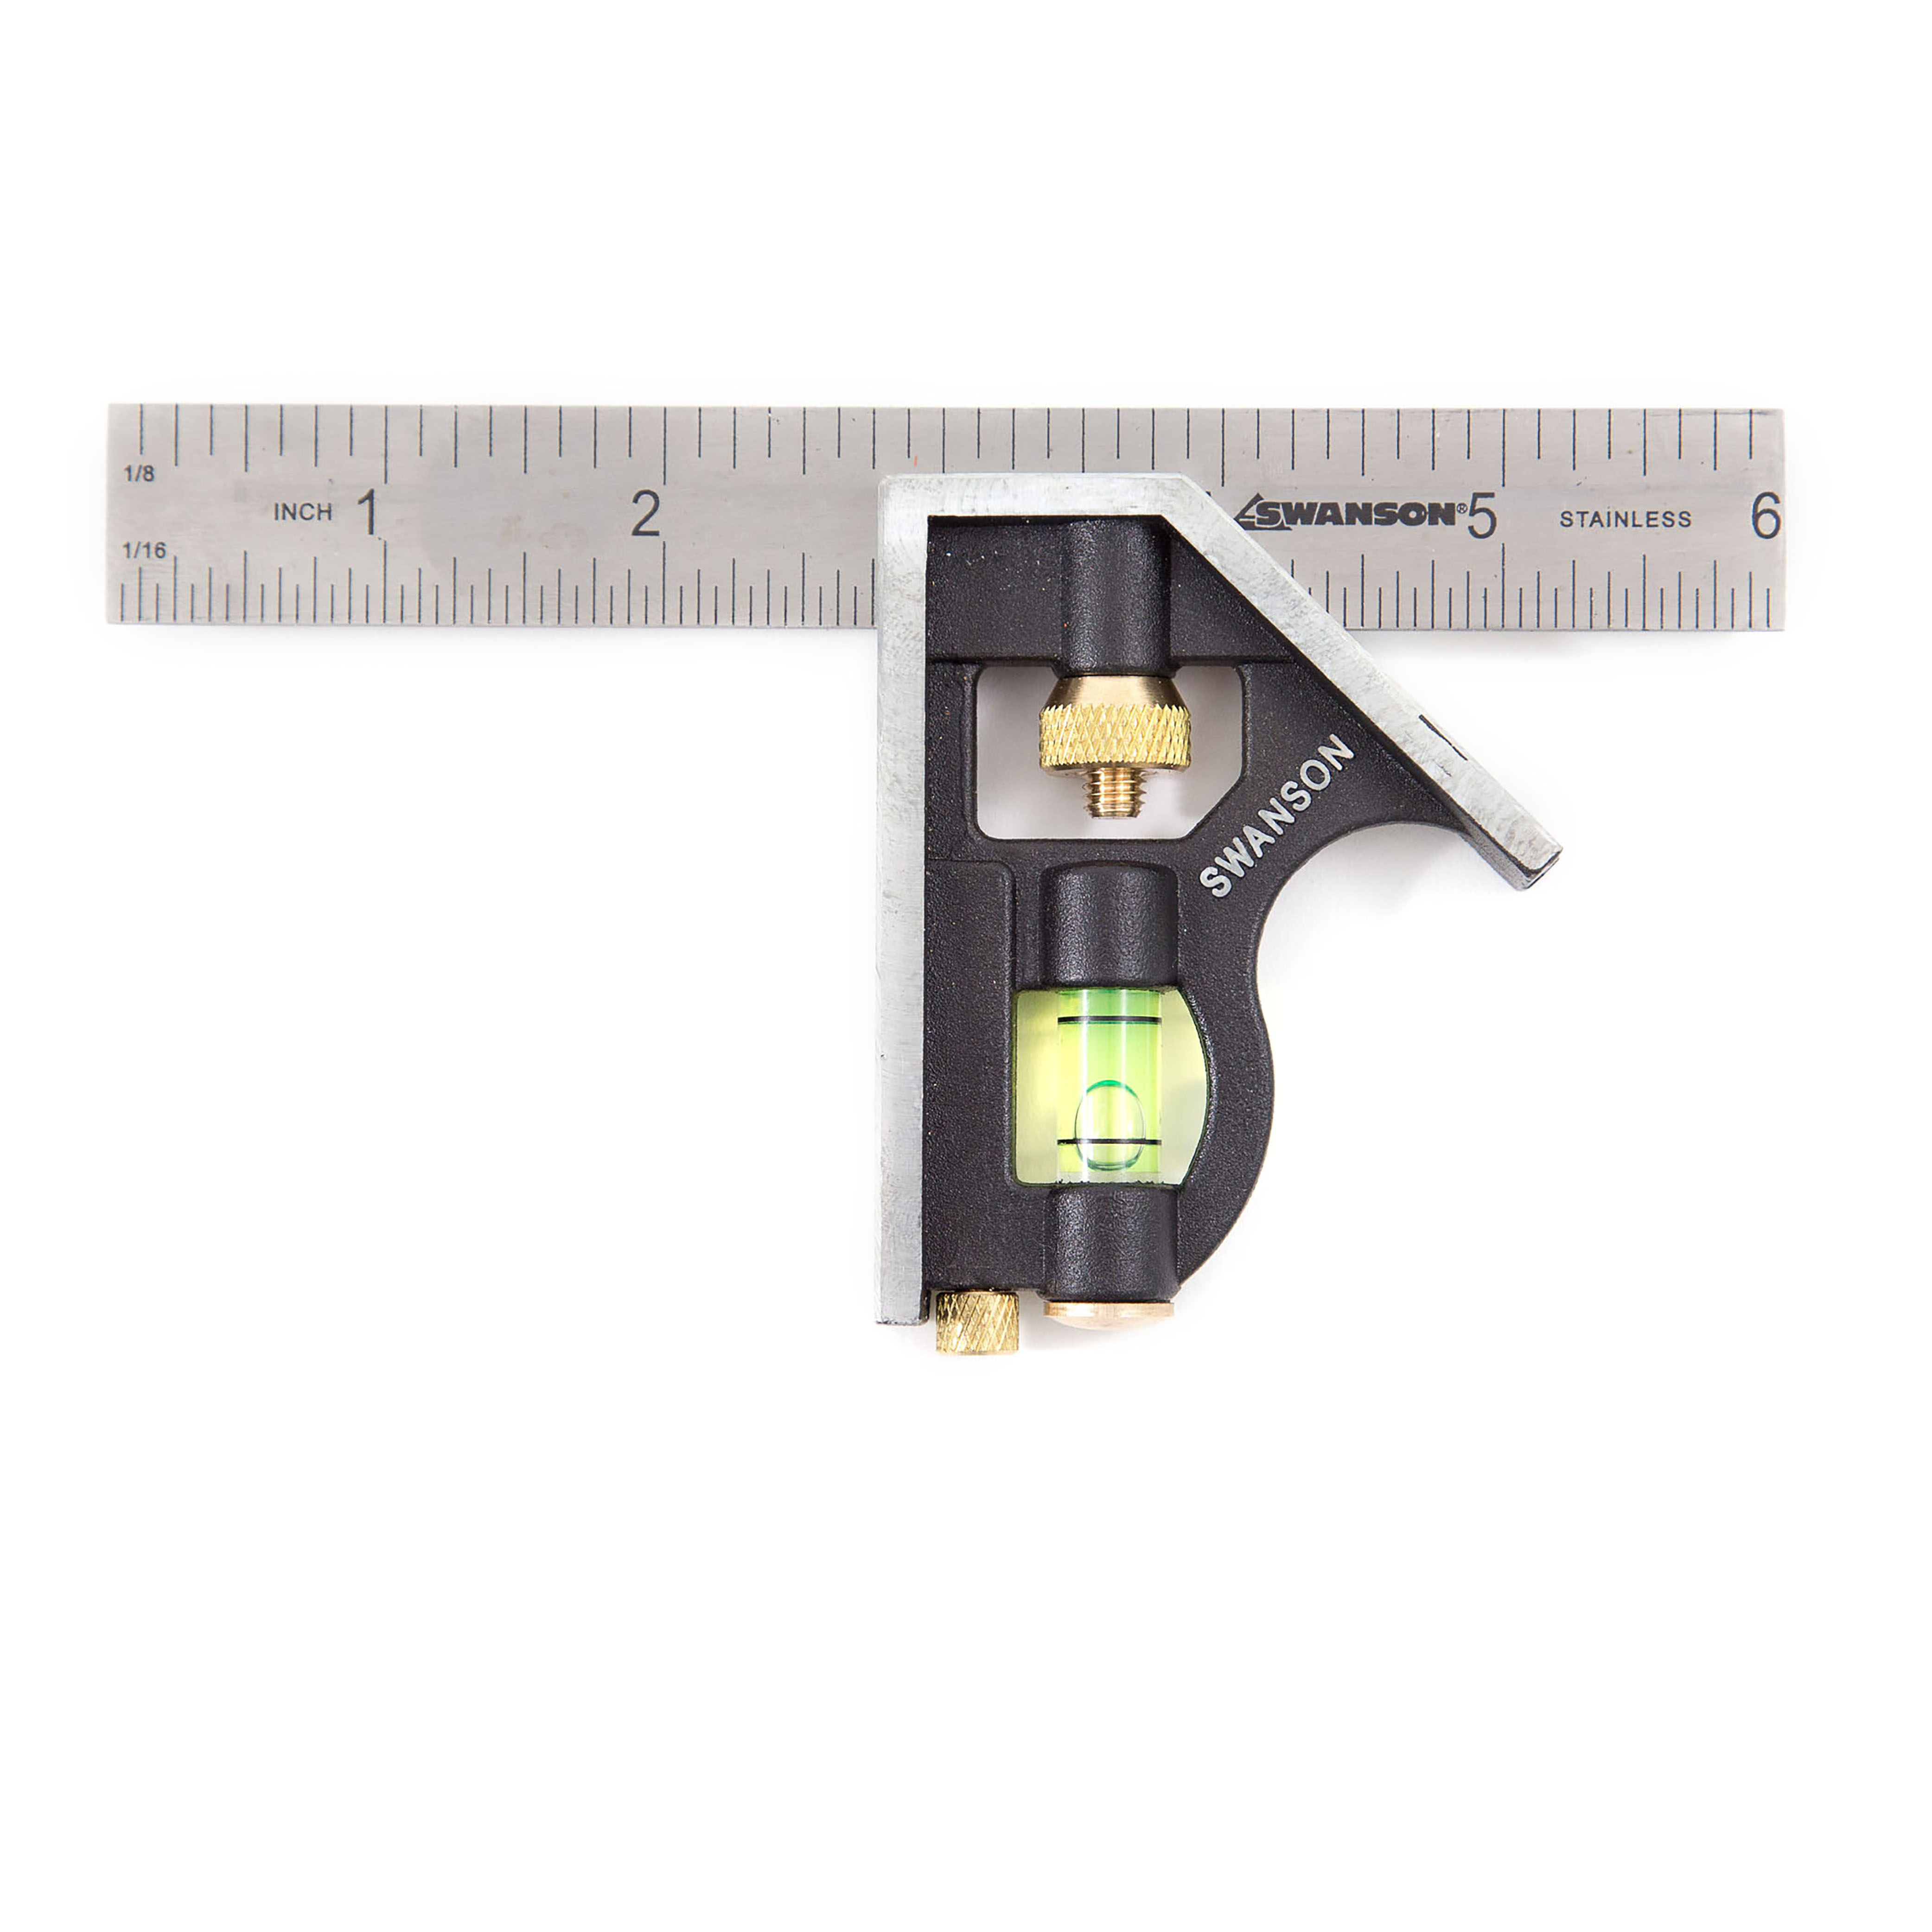 Swanson 6 inch Pocket Sized Combination Square with Stainless Steel Rule, Brass Hardware, Zinc Head with 45 and 90 degree Angles, Acrylic Vial and Built In Scriber - image 1 of 7